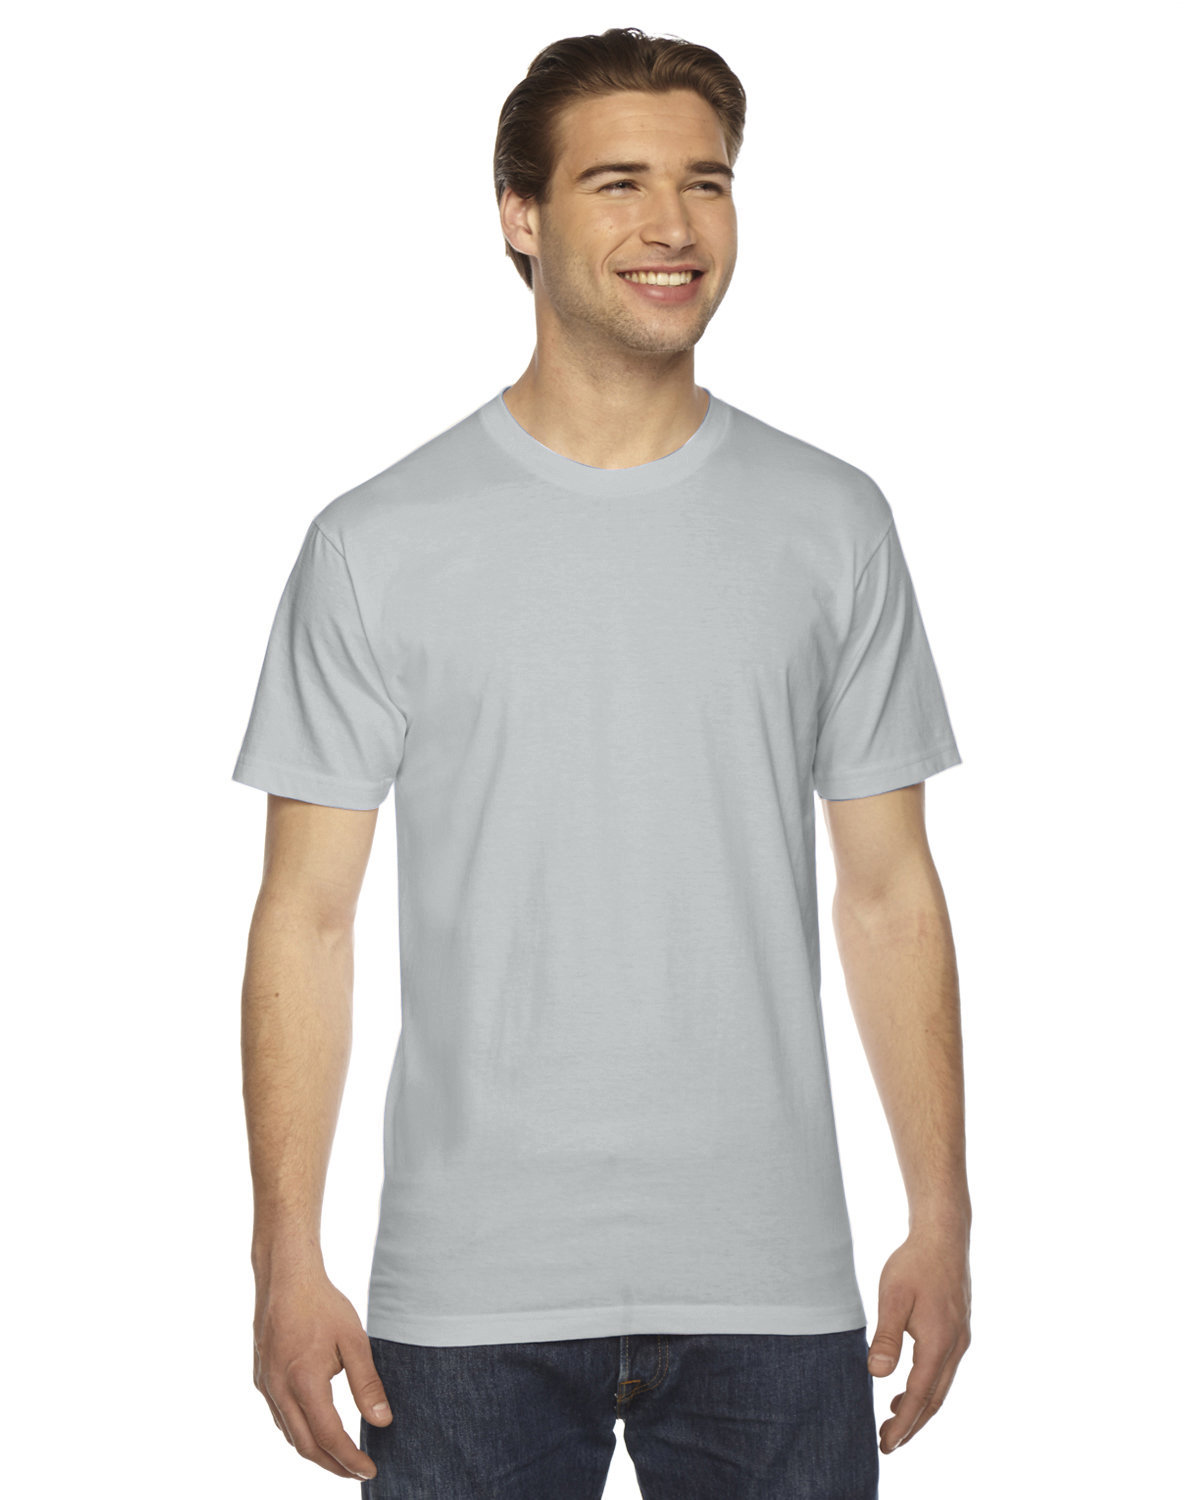 American Apparel Unisex Fine Jersey USA Made T-Shirt new silver 